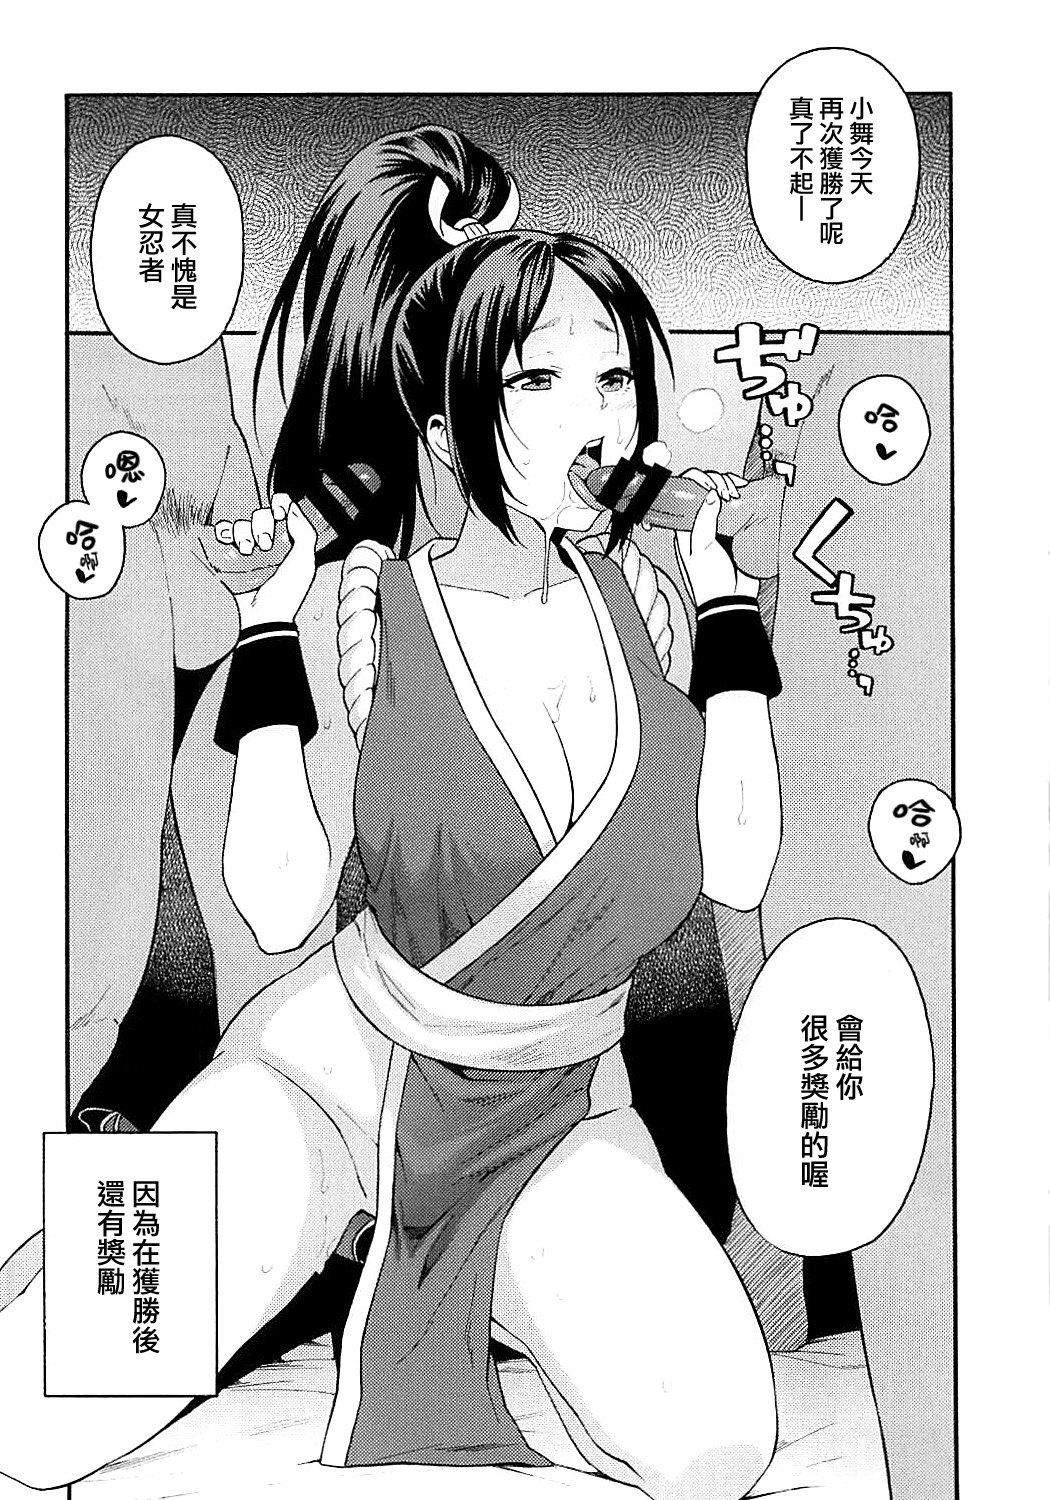 (COMIC1☆13) [SOLID AIR (Zonda)] Inmairan (King of Fighters) [Chinese] [无毒汉化组] page 4 full